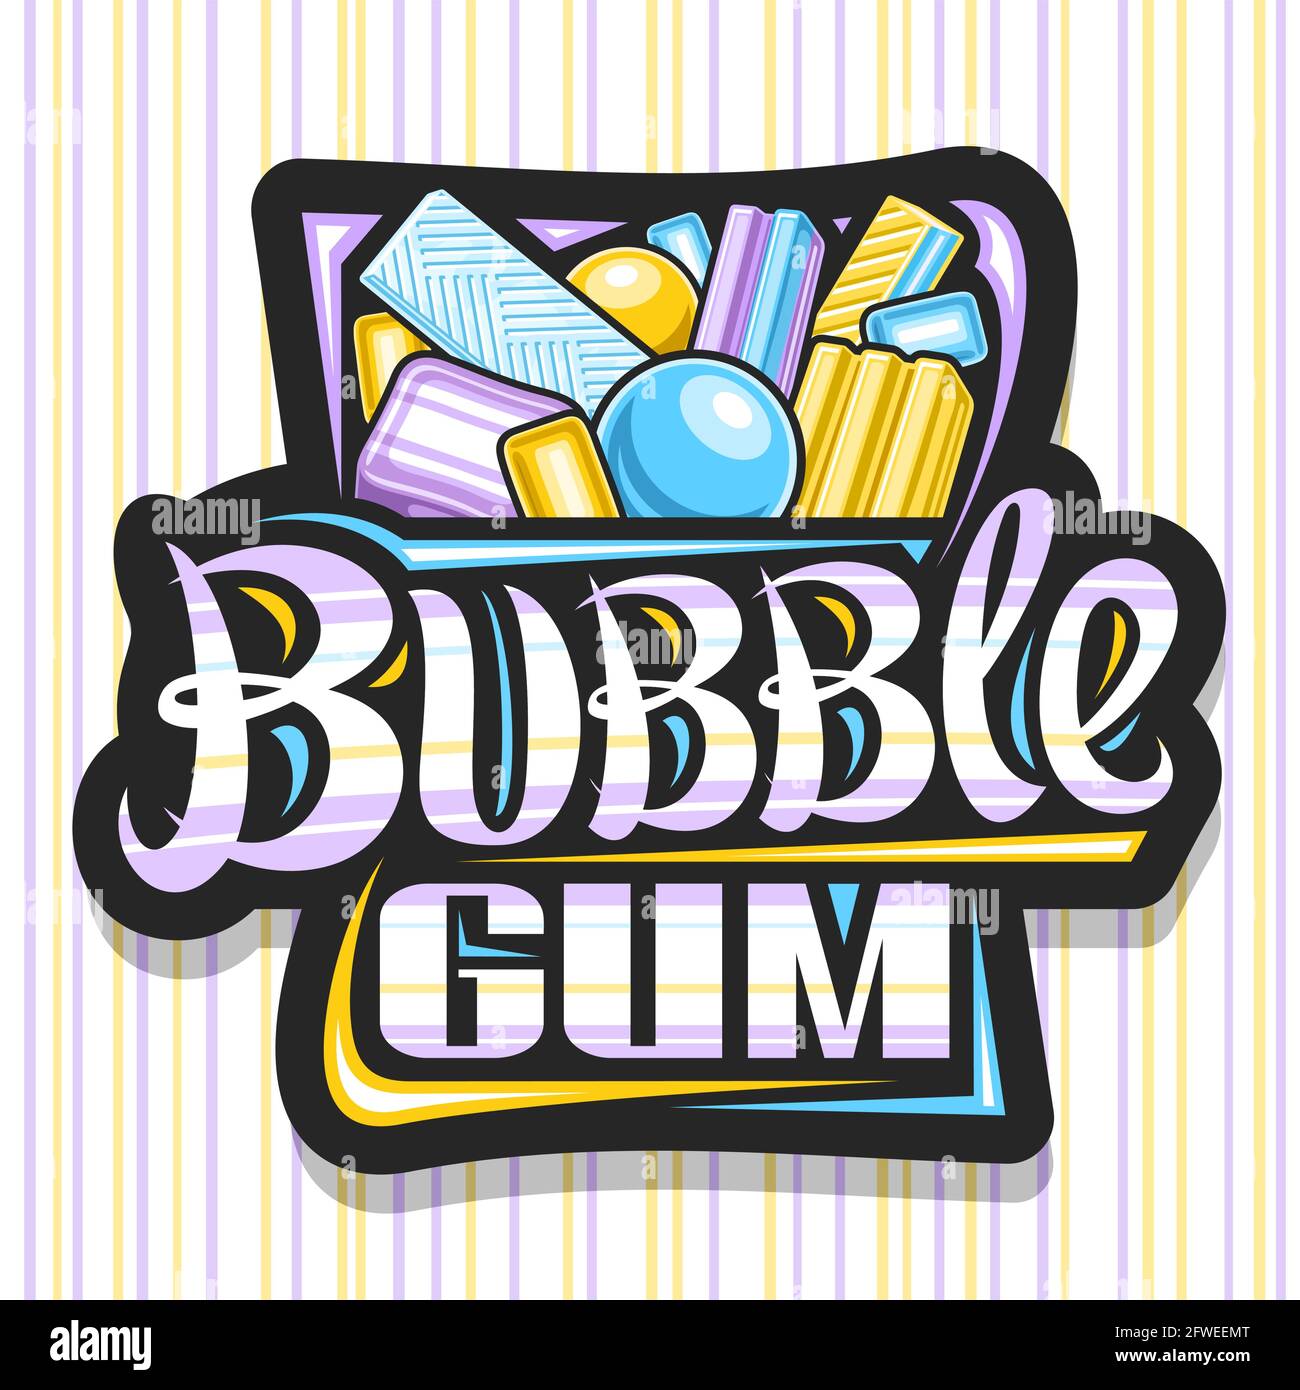 Vector logo for Bubble Gum, black decorative signboard with illustration of assorted cute bubblegums and yellow candies, poster with unique brush lett Stock Vector